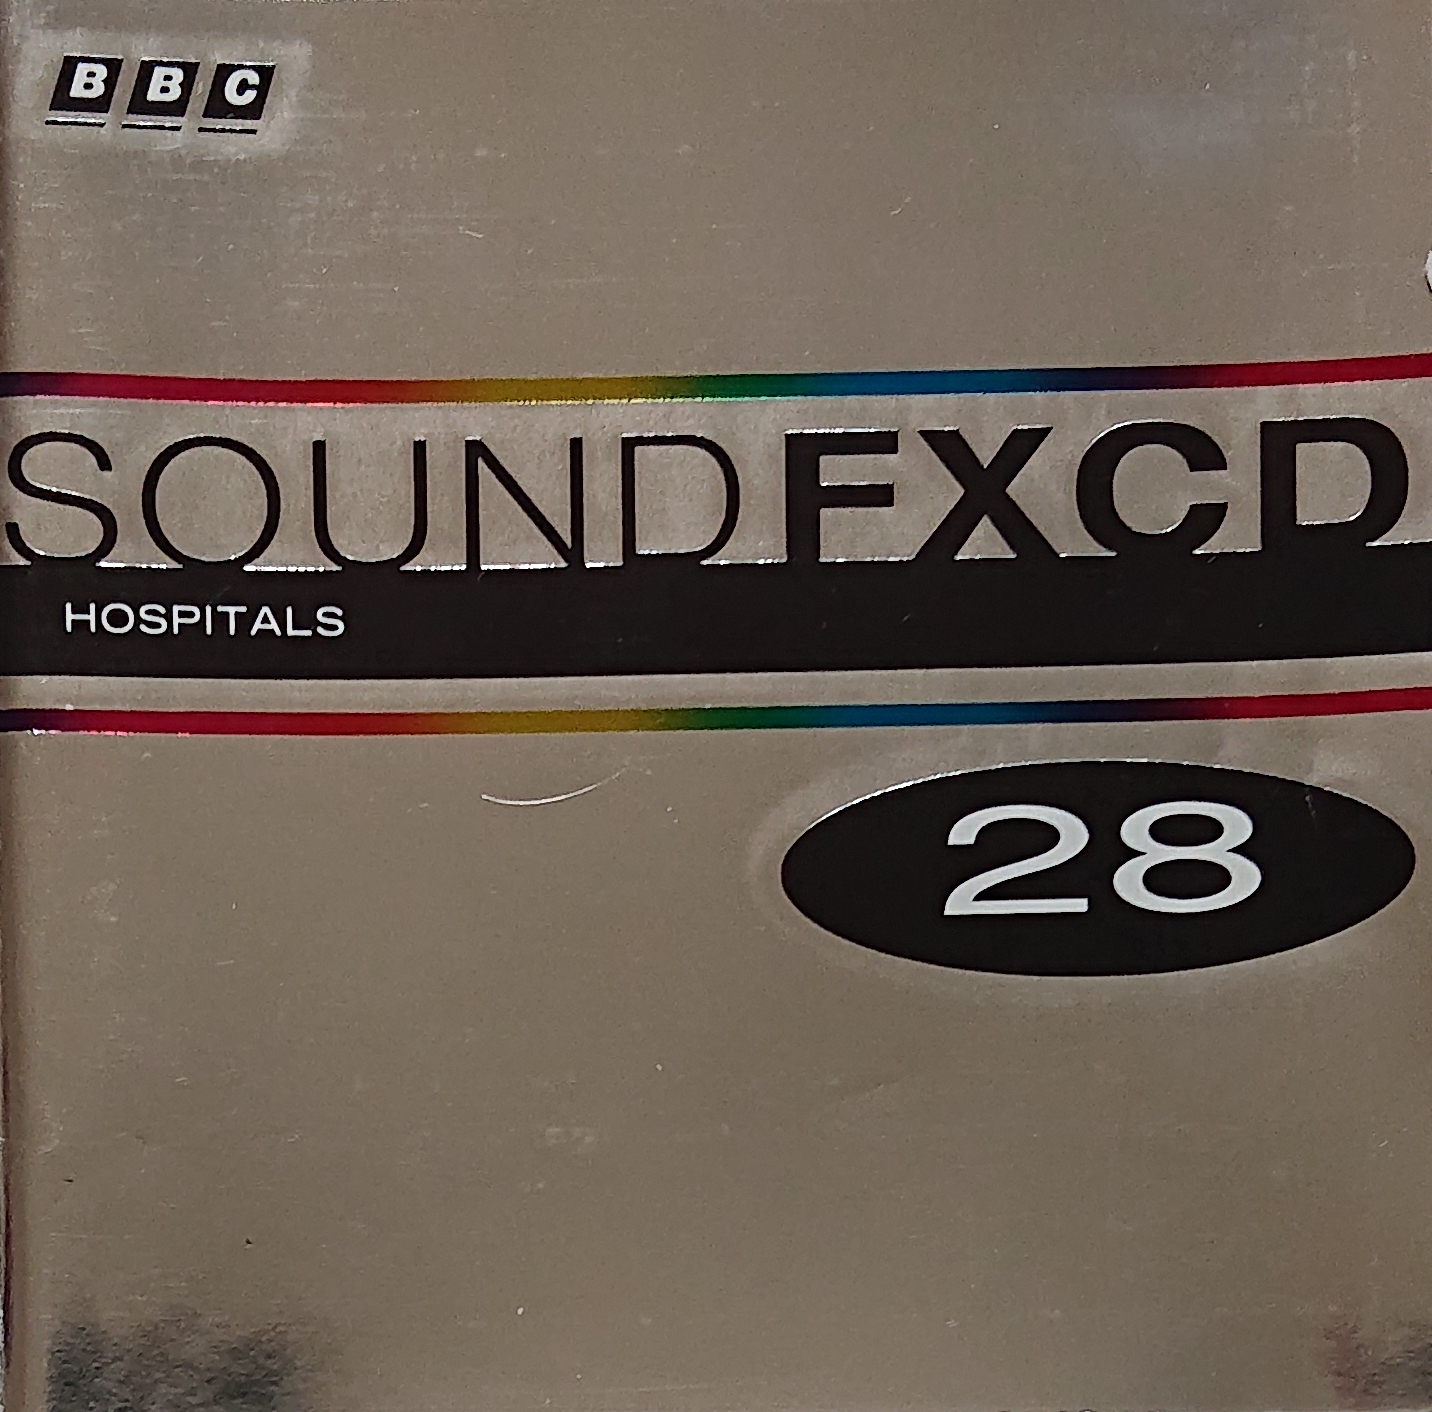 Picture of BBCCD SFX028 Hospitals by artist Various from the BBC cds - Records and Tapes library